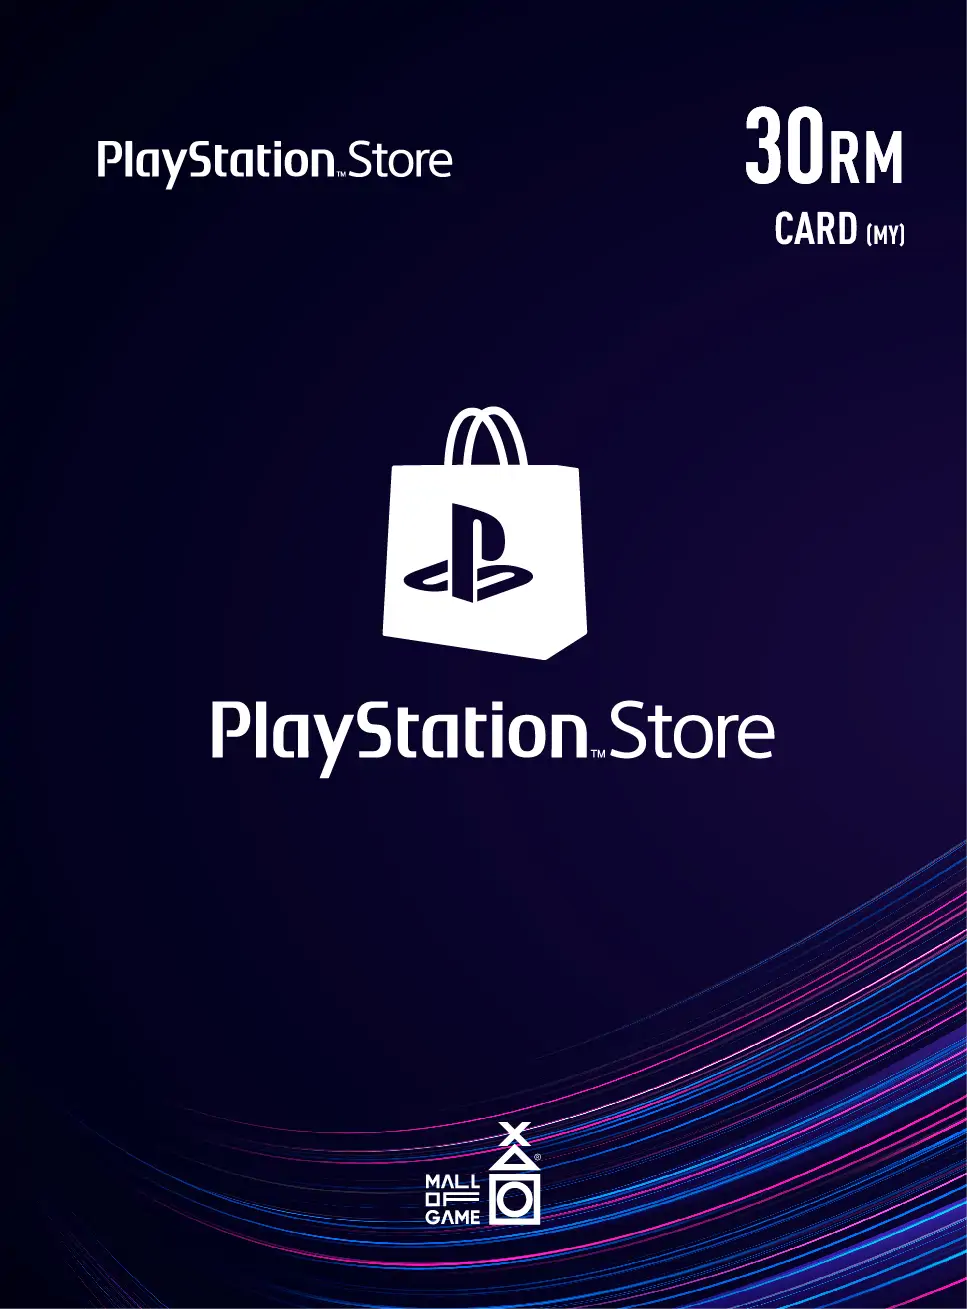 PlayStation™Store RM30 Cards (MY)